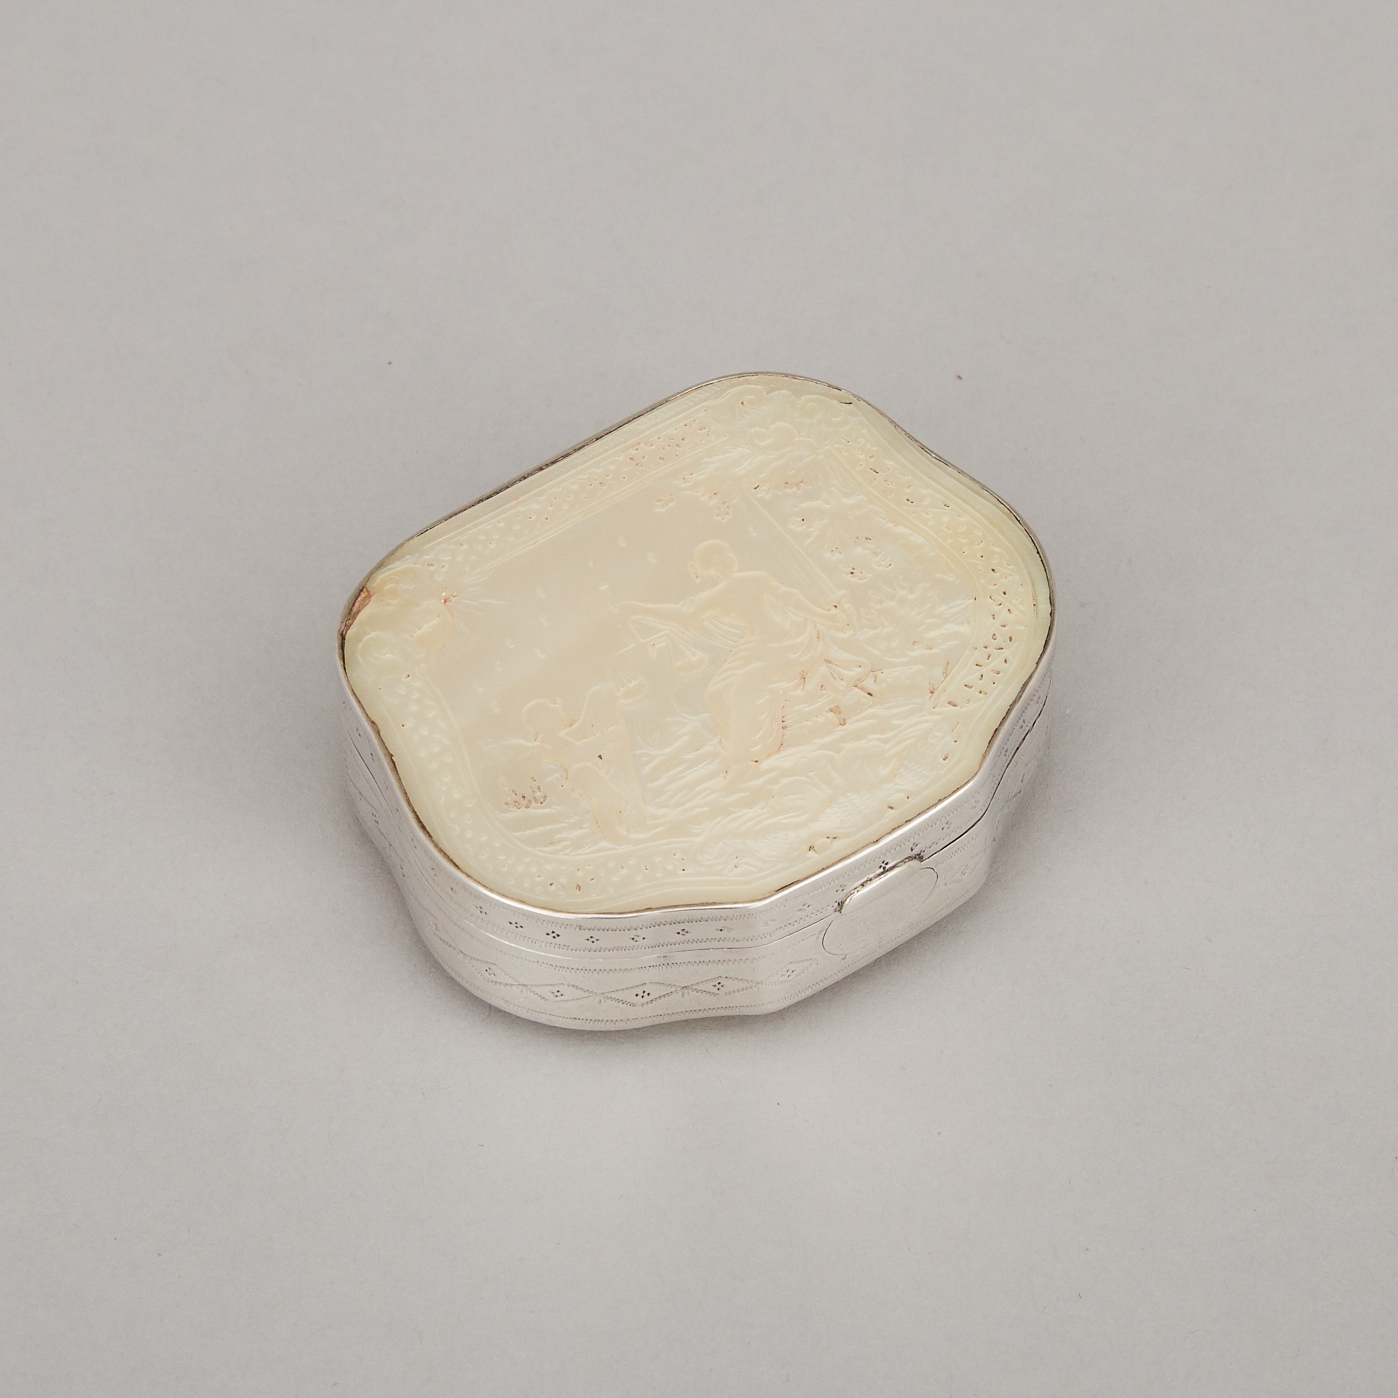 Engraved Silver and Mother-of-Pearl Snuff Box, late 18th century